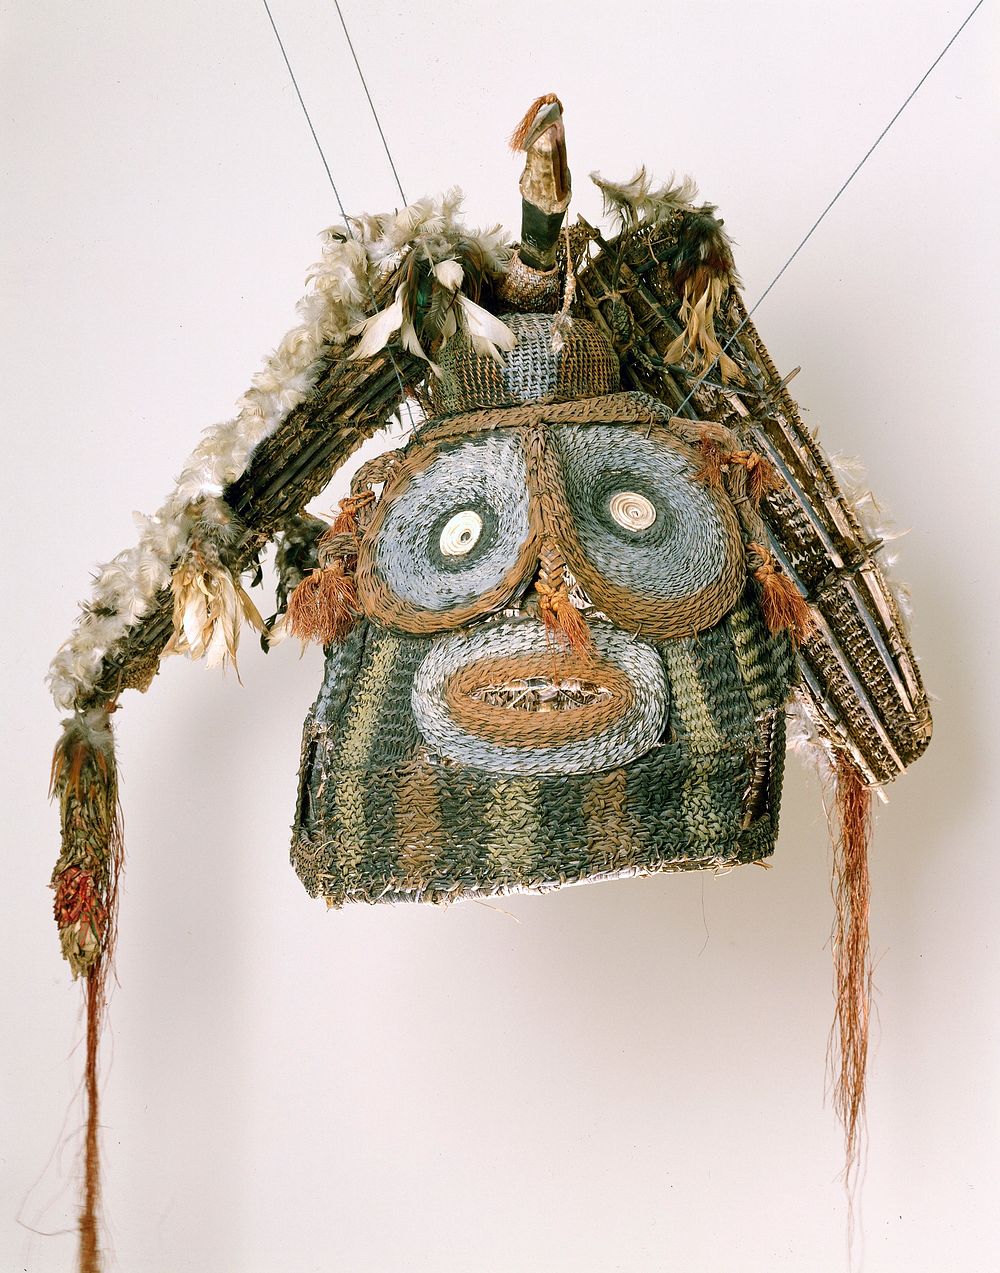 Dance Mask with Bird Totem. Original from the Minneapolis Institute of Art.